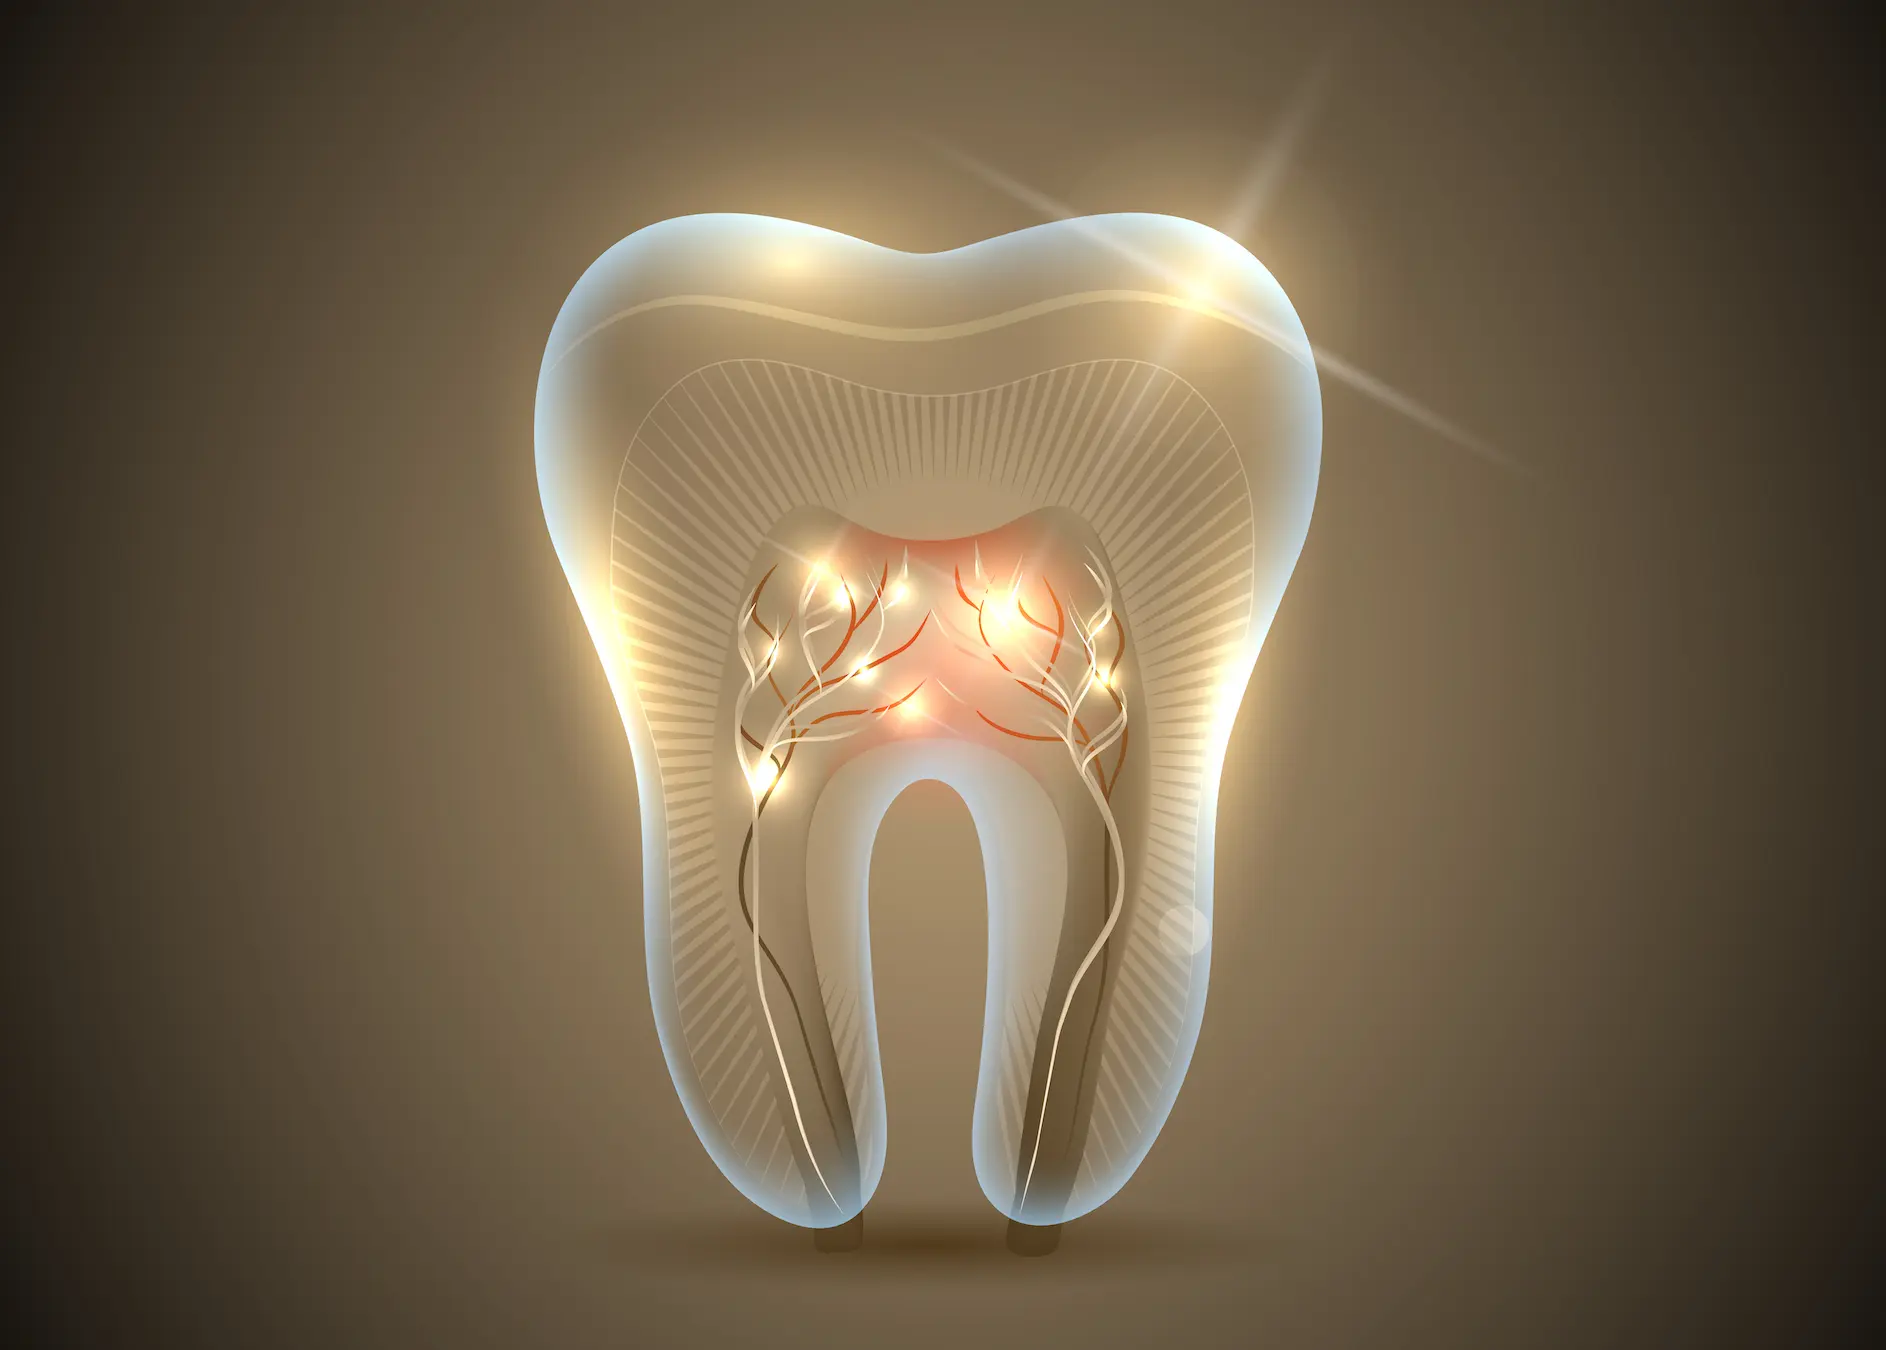 Meet the New Breakthrough A Drug That Can Actually Regrow Your Teeth Is Heading to Trials--